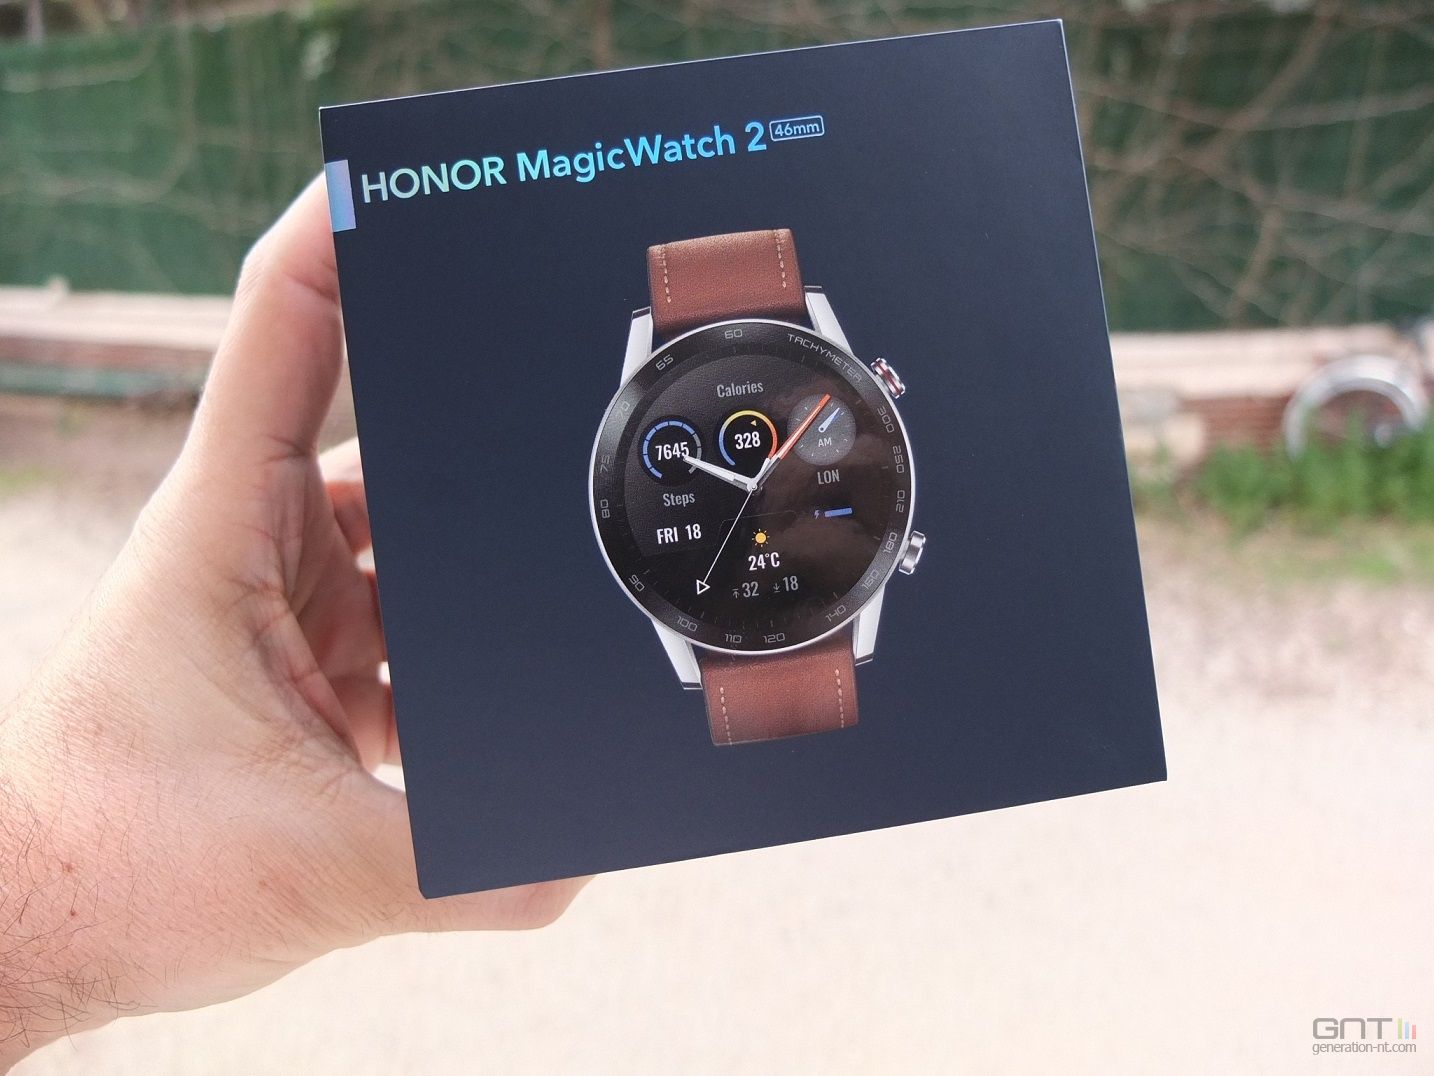 Honor MagicWatch 2 packaging